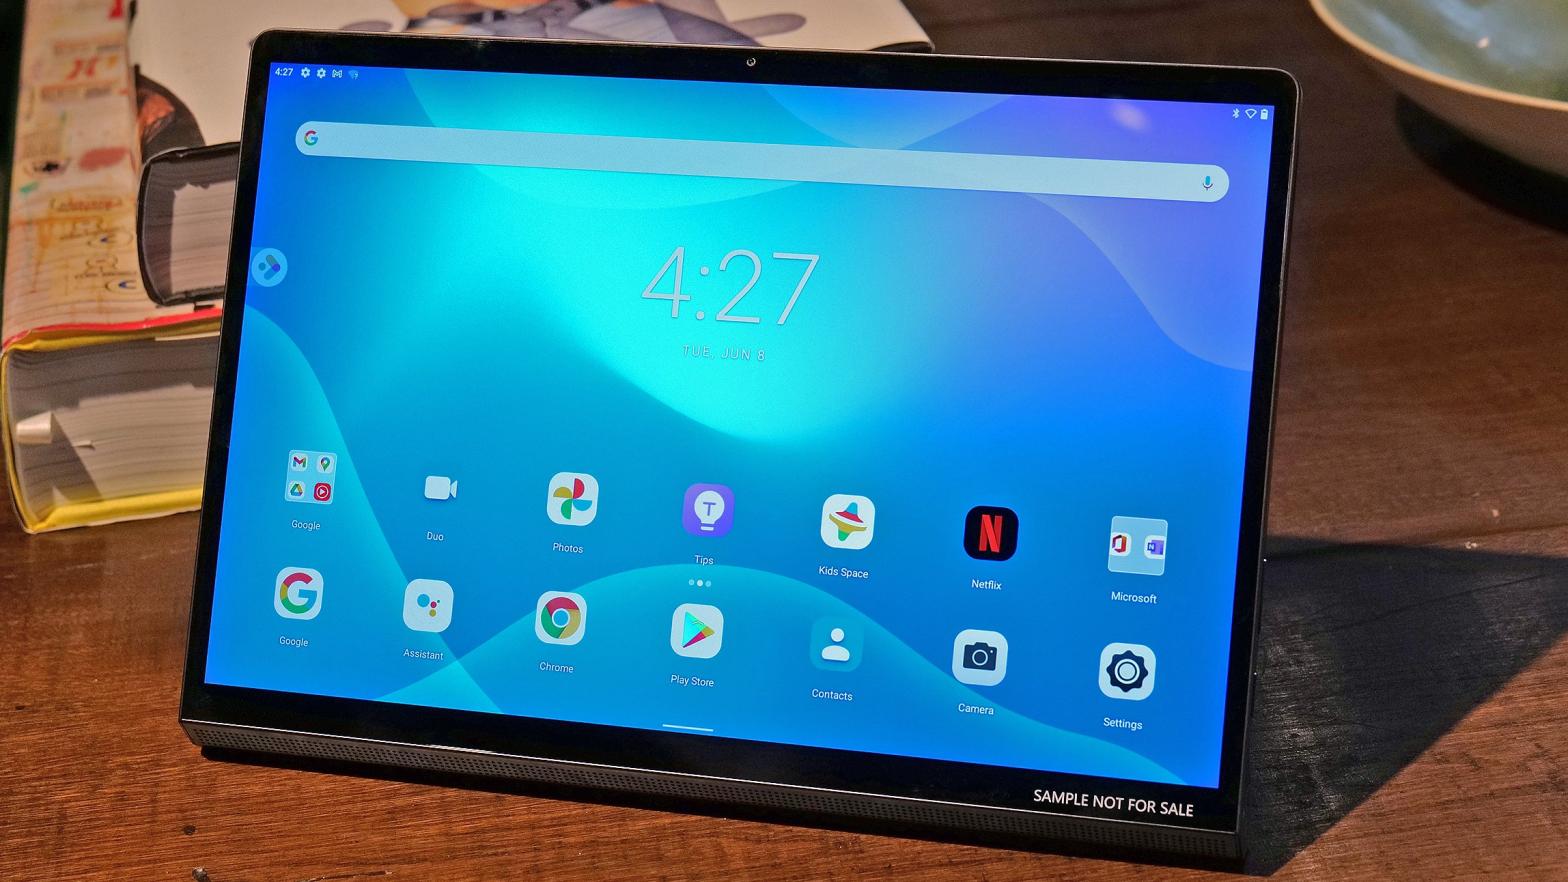 The Lenovo Yoga Tab 13 features a micro HDMI port for converting to a monitor.  (Photo: Sam Rutherford / Gizmodo)